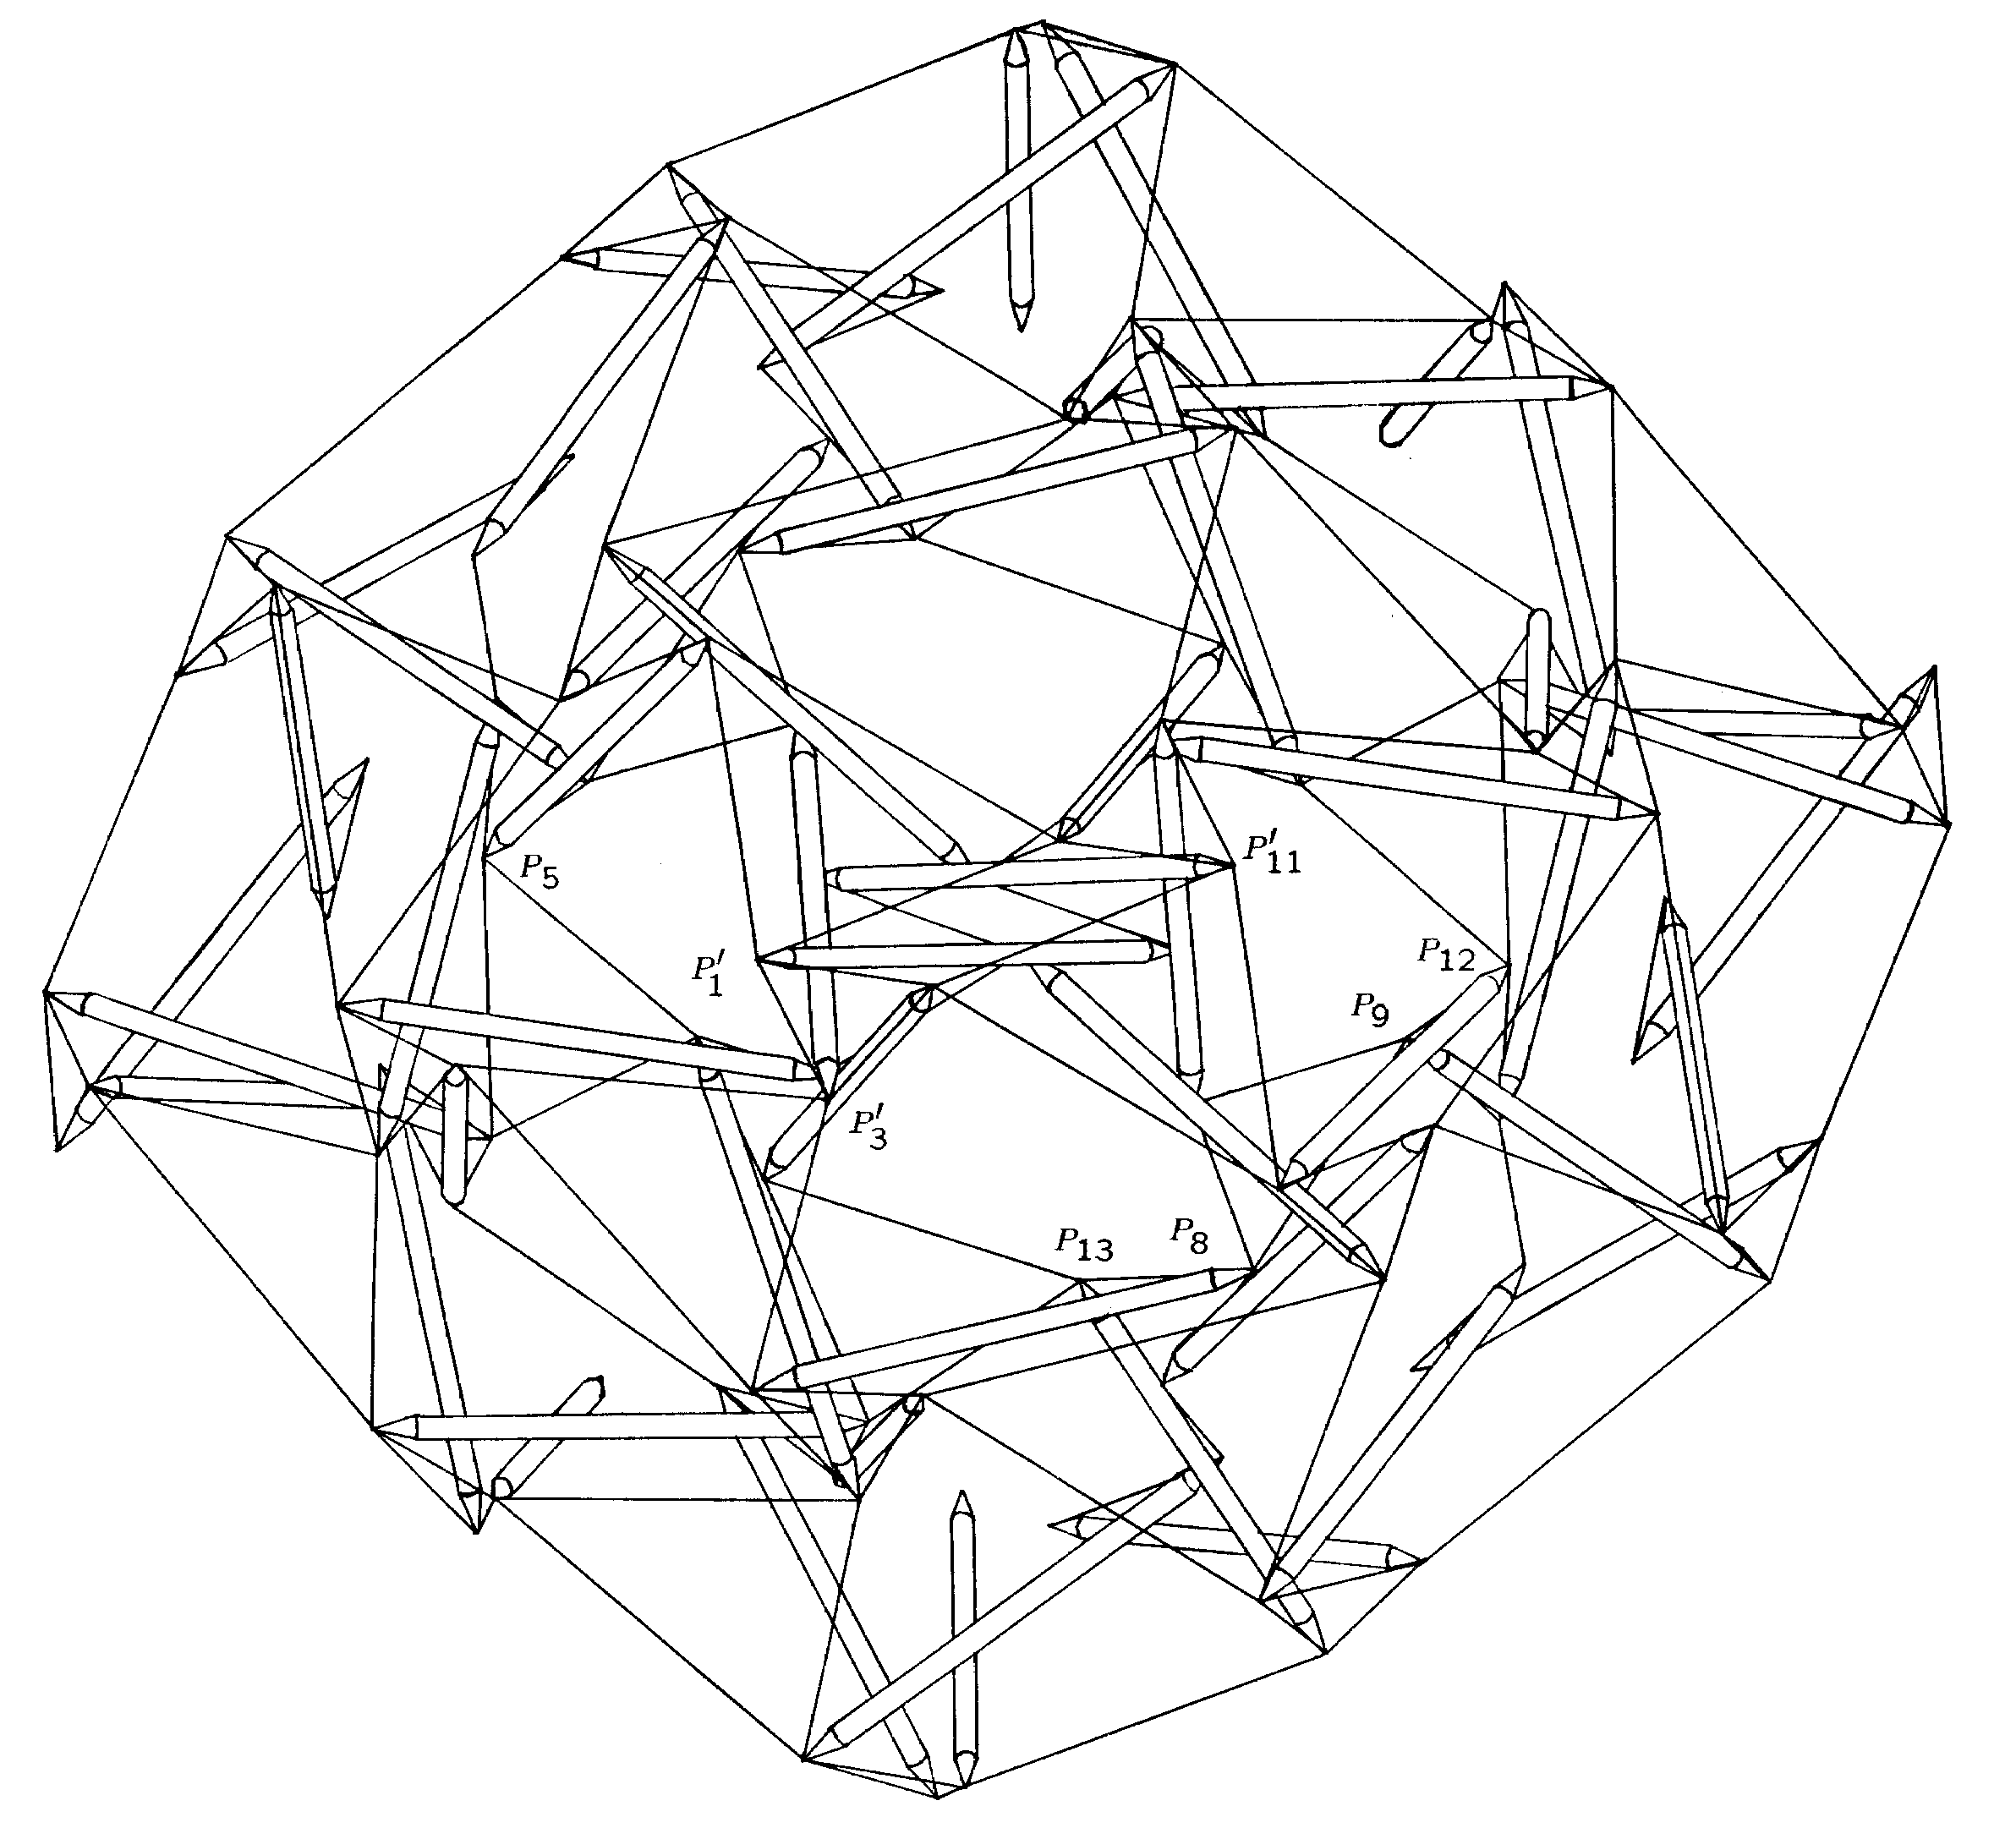 line drawing of dowel-and-fishing-line of near half of 6v sphere with some point labels